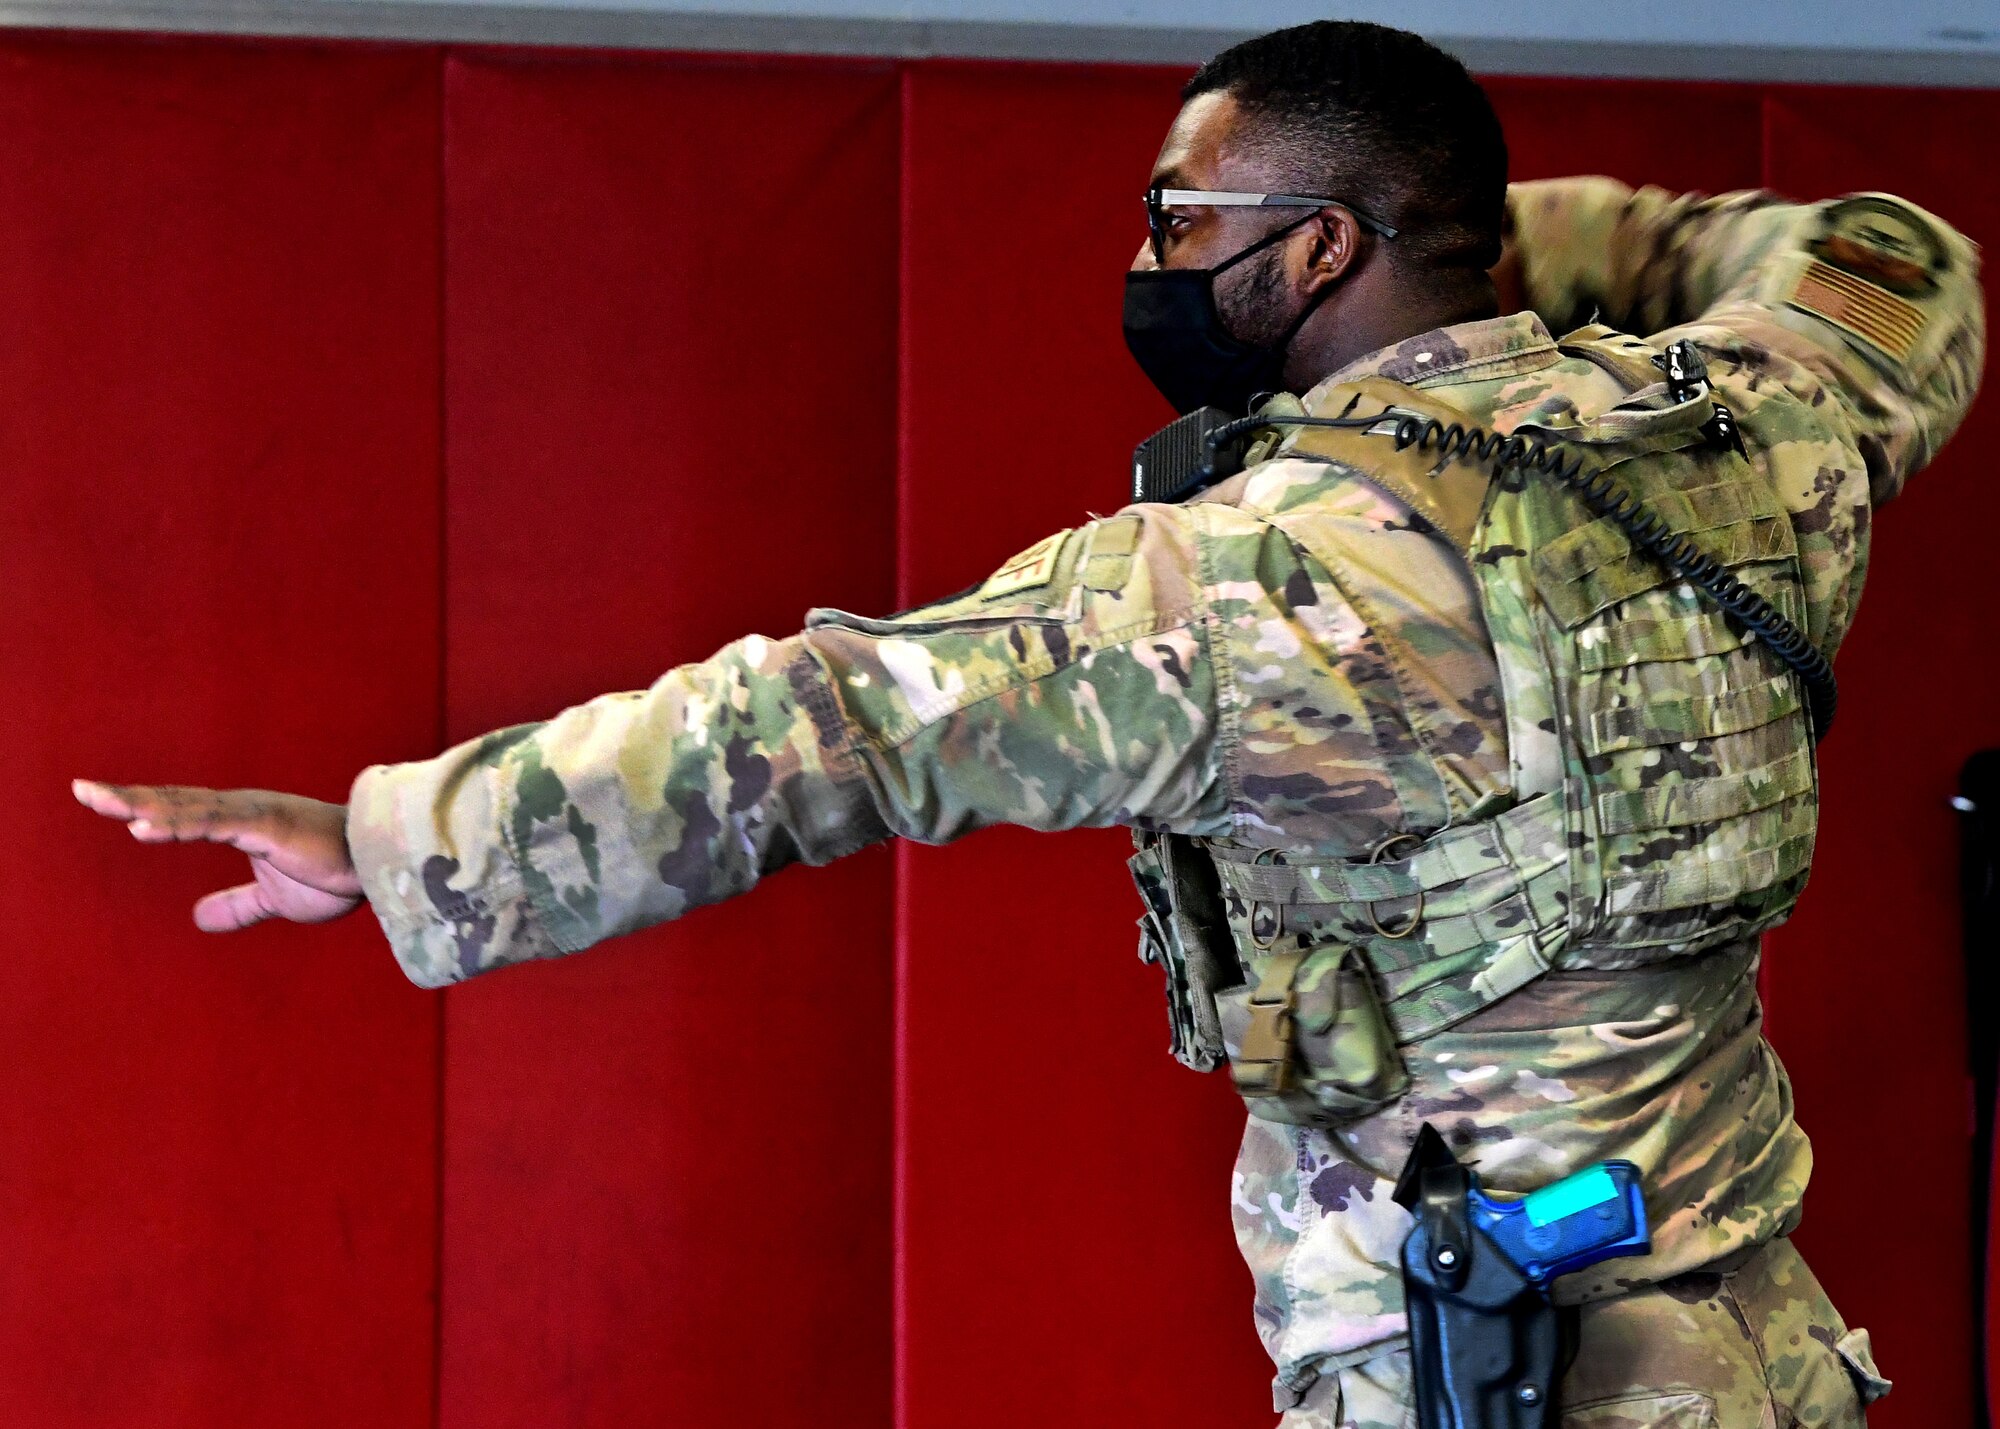 926th Security Forces Squadron practices baton drills during their Leader Led Training Course, April 9, 2021, at Nellis Air Force Base, Nevada.